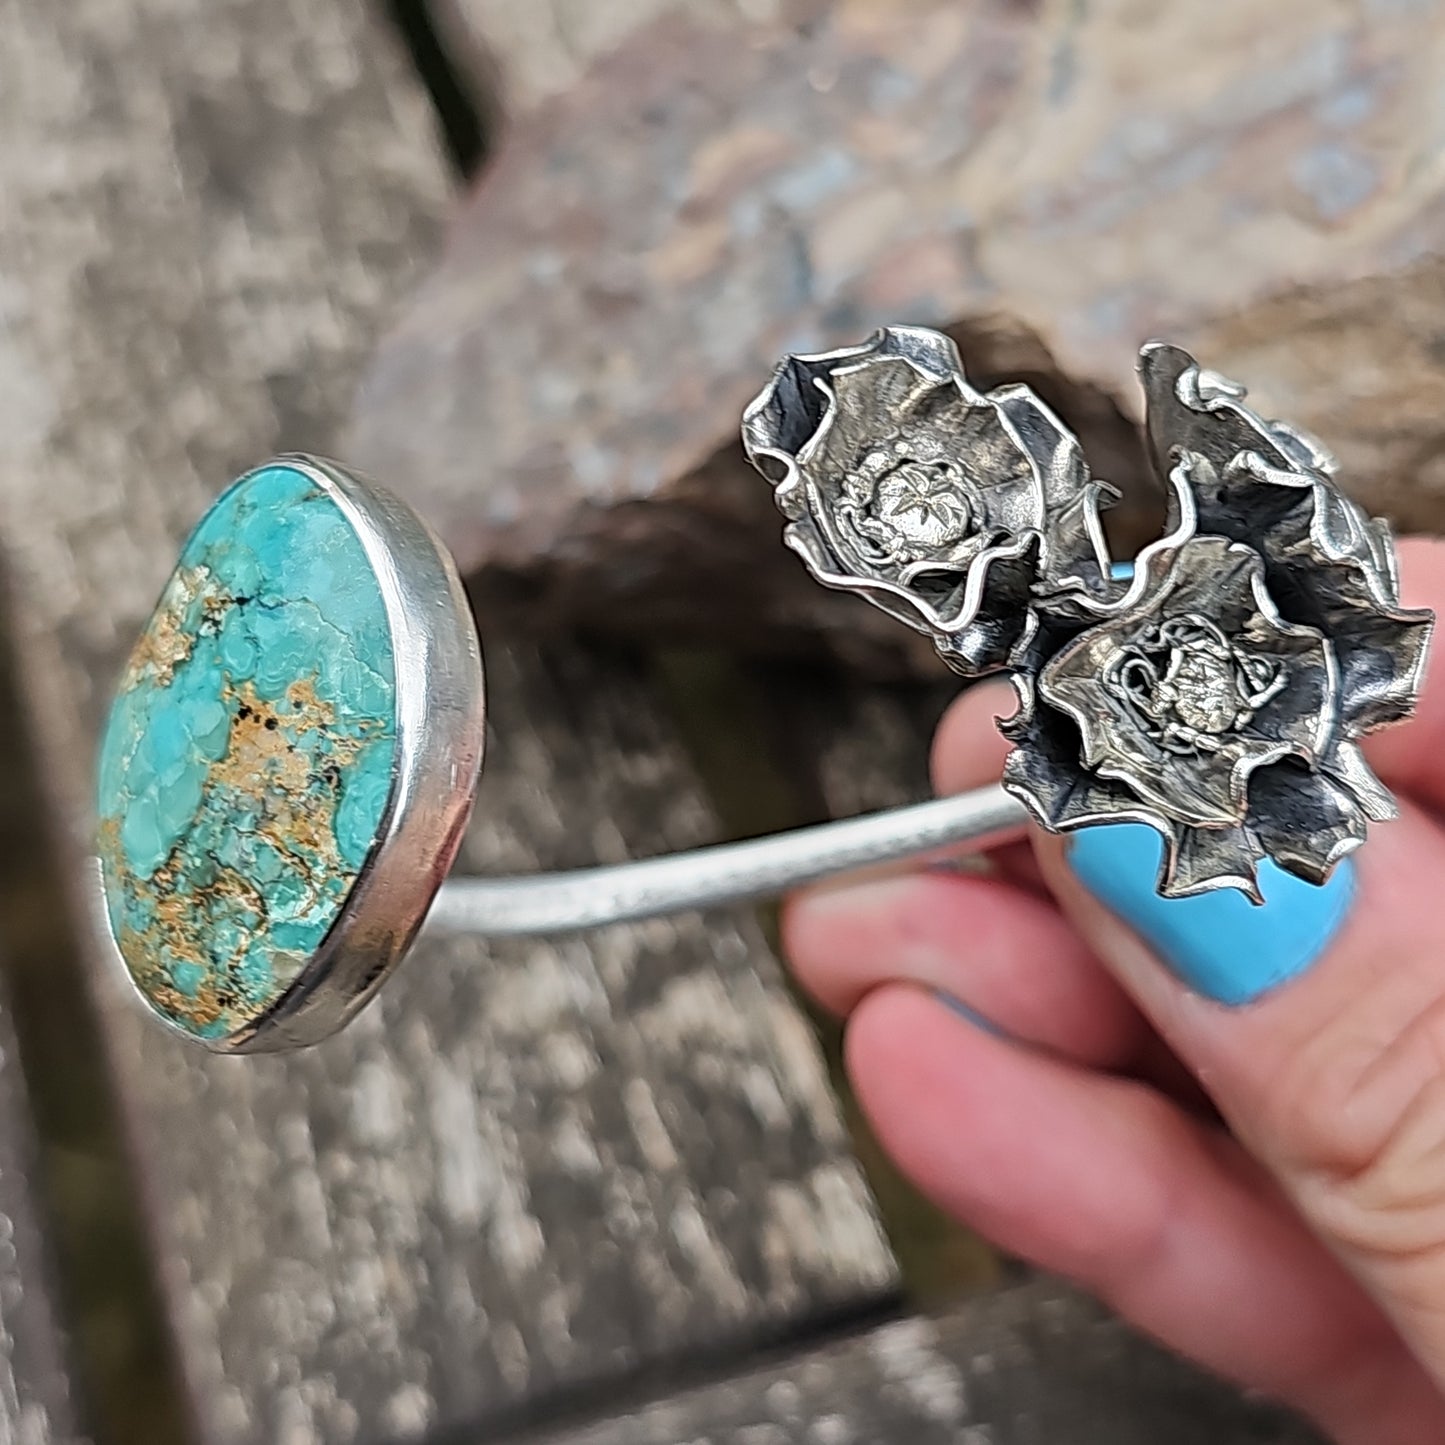 XX//CORSAGE Bracelet - Turquoise Bonanza and All Sterling Silver size M/L